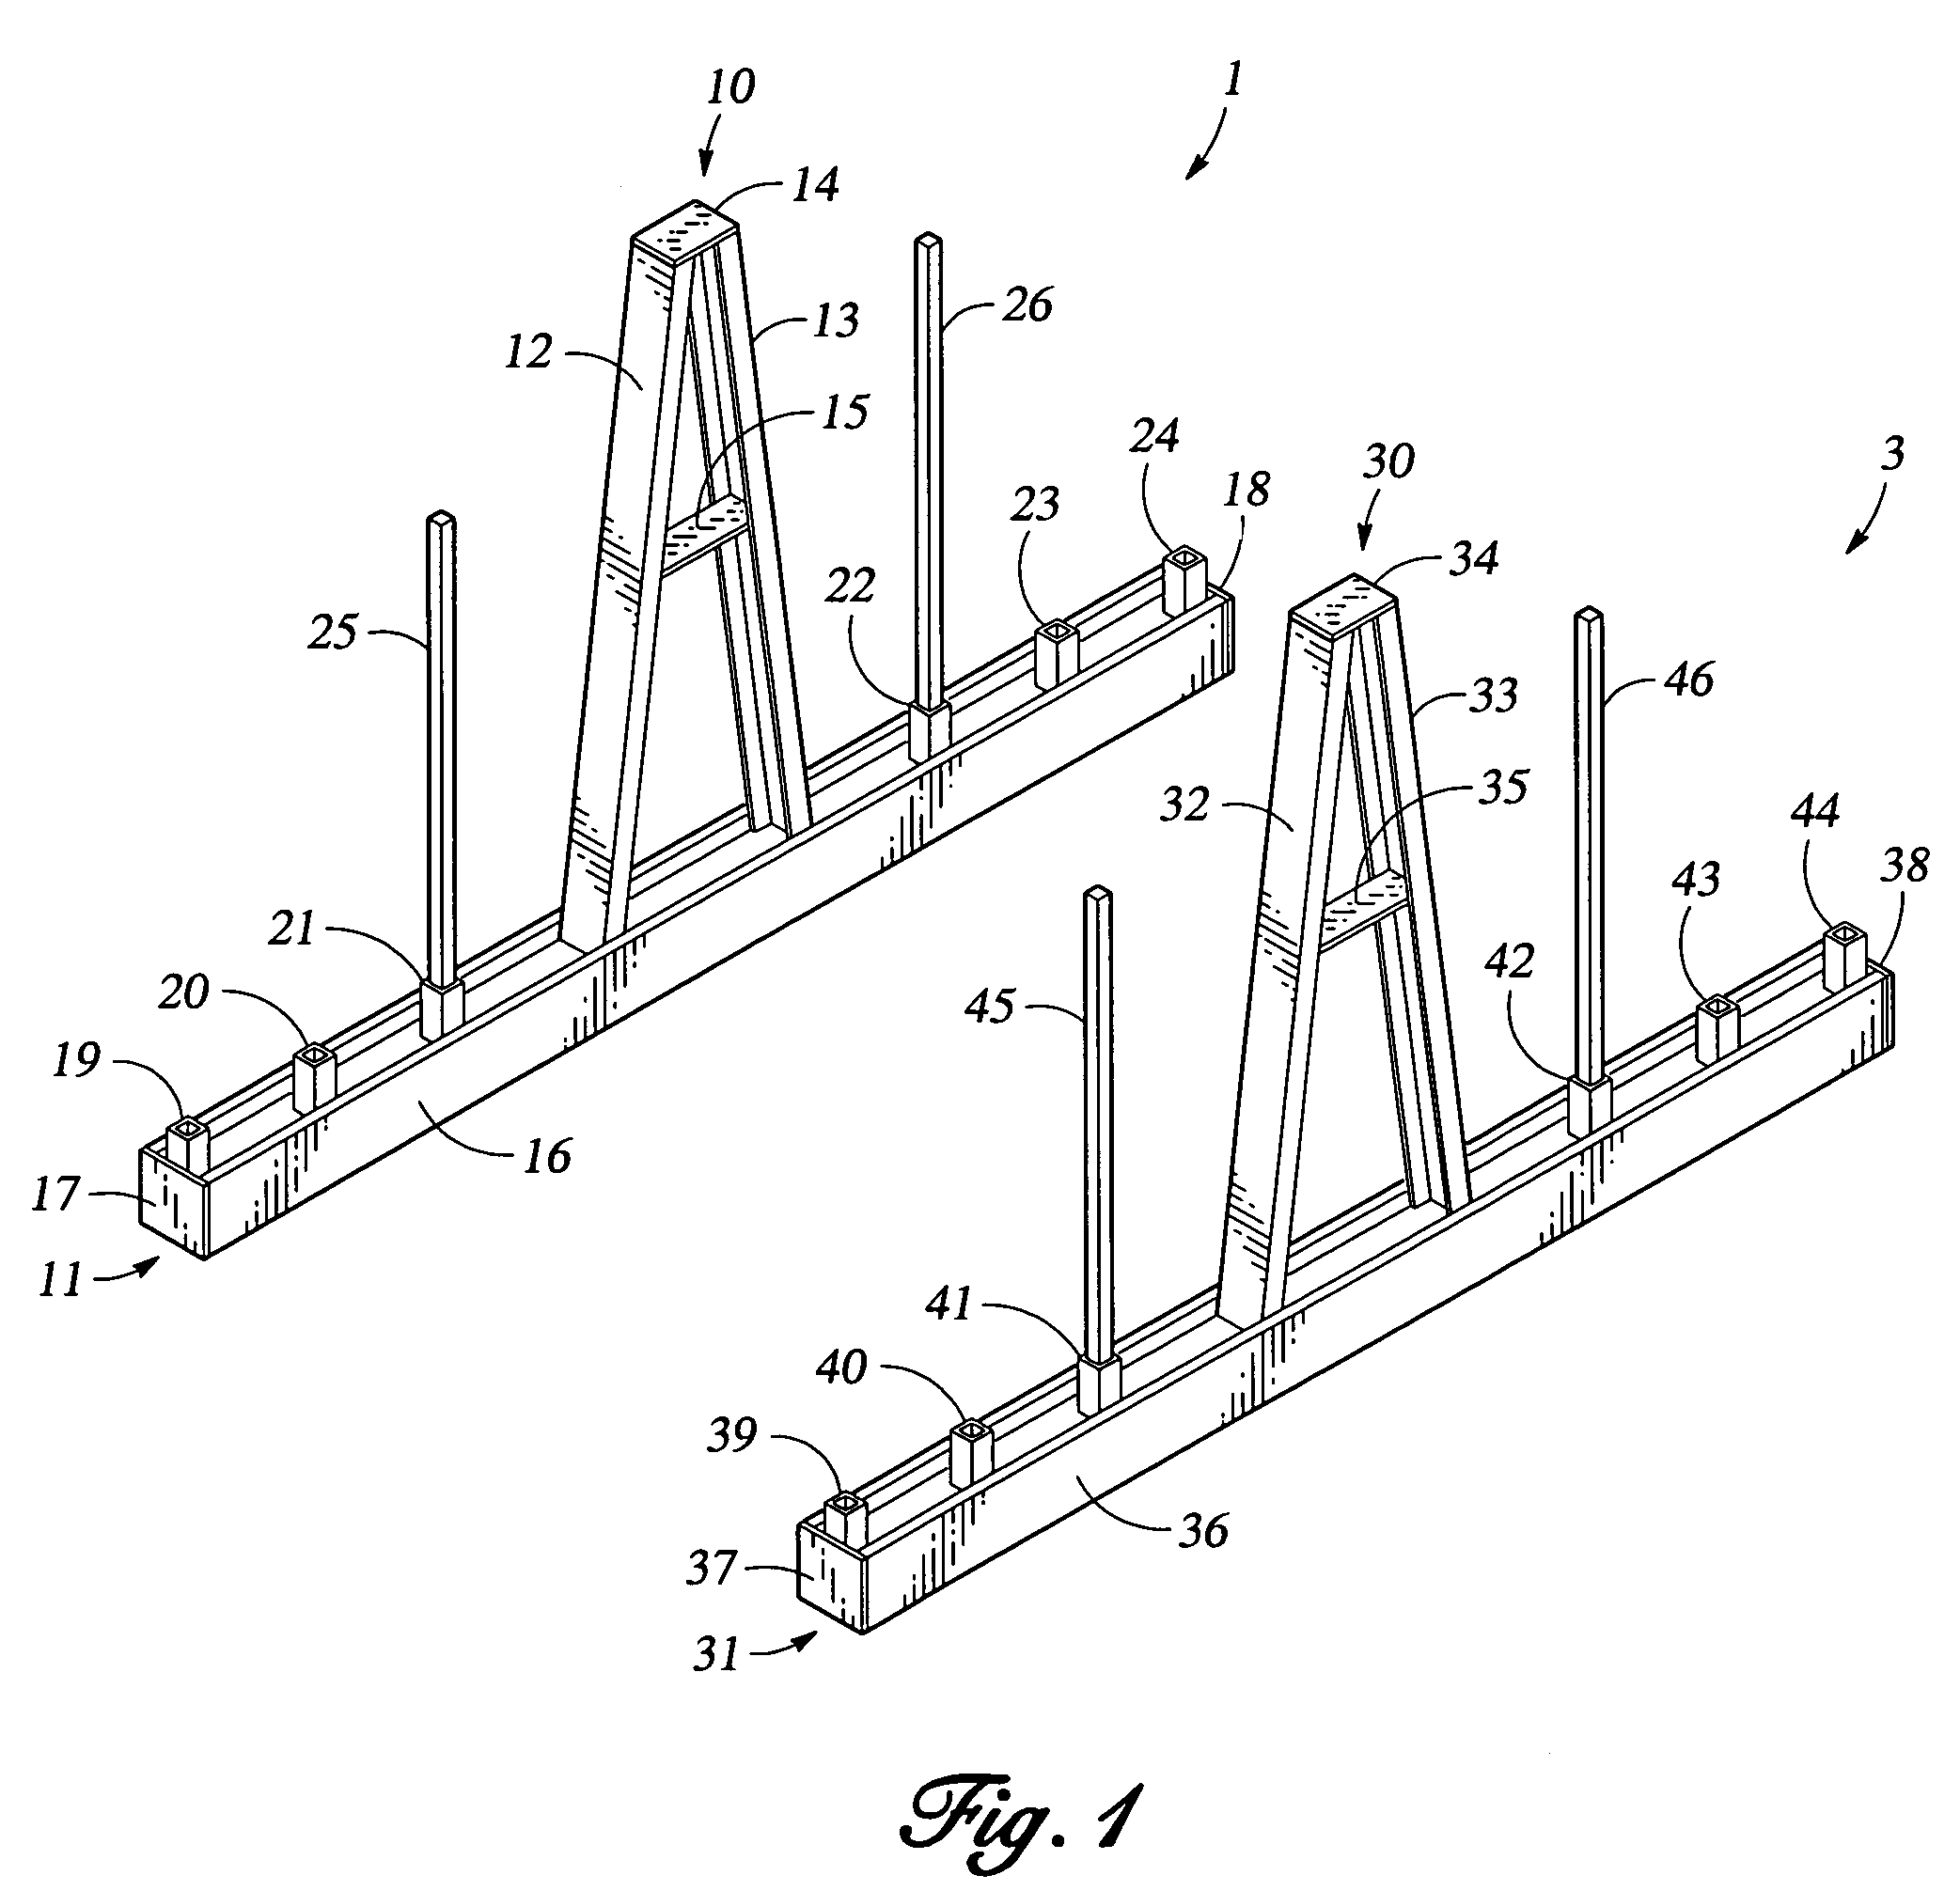 Supports for storing sheets of granite, stone, glass, and other materials